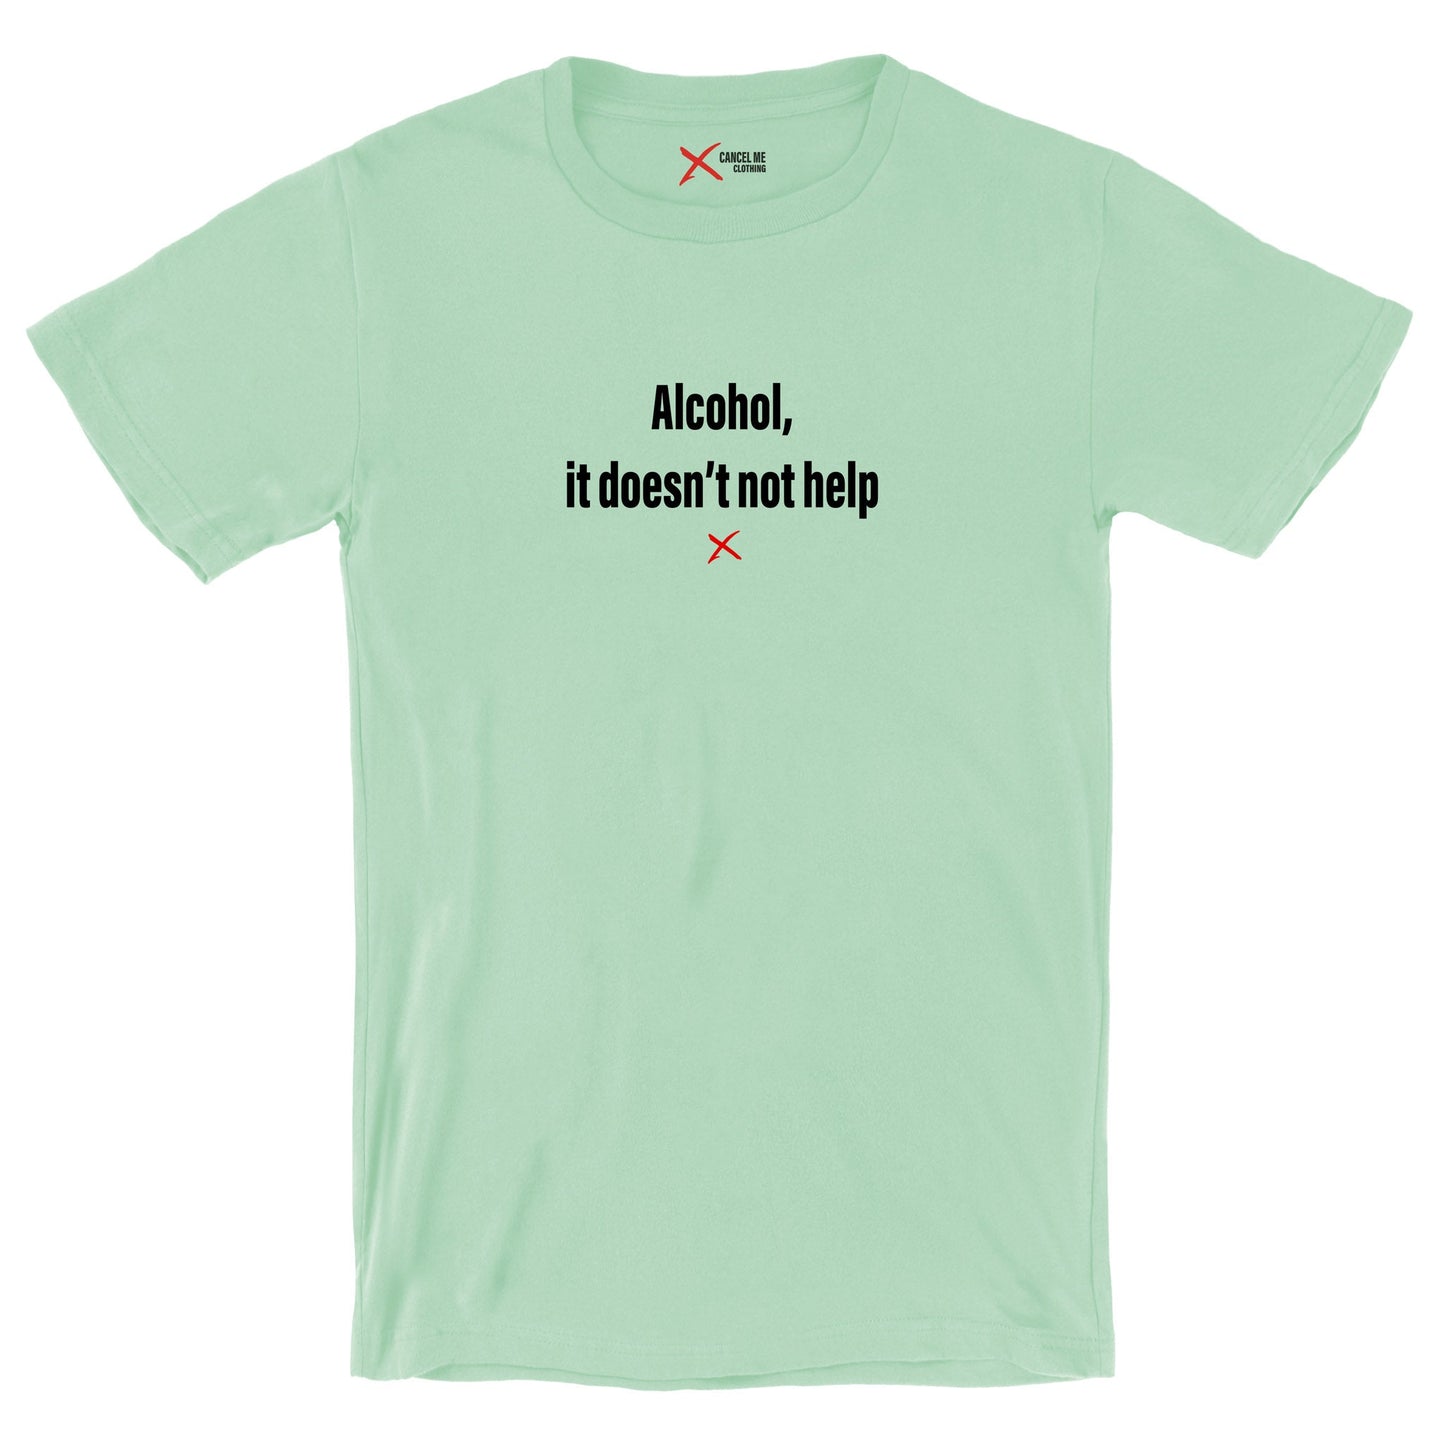 Alcohol, it doesn't not help - Shirt